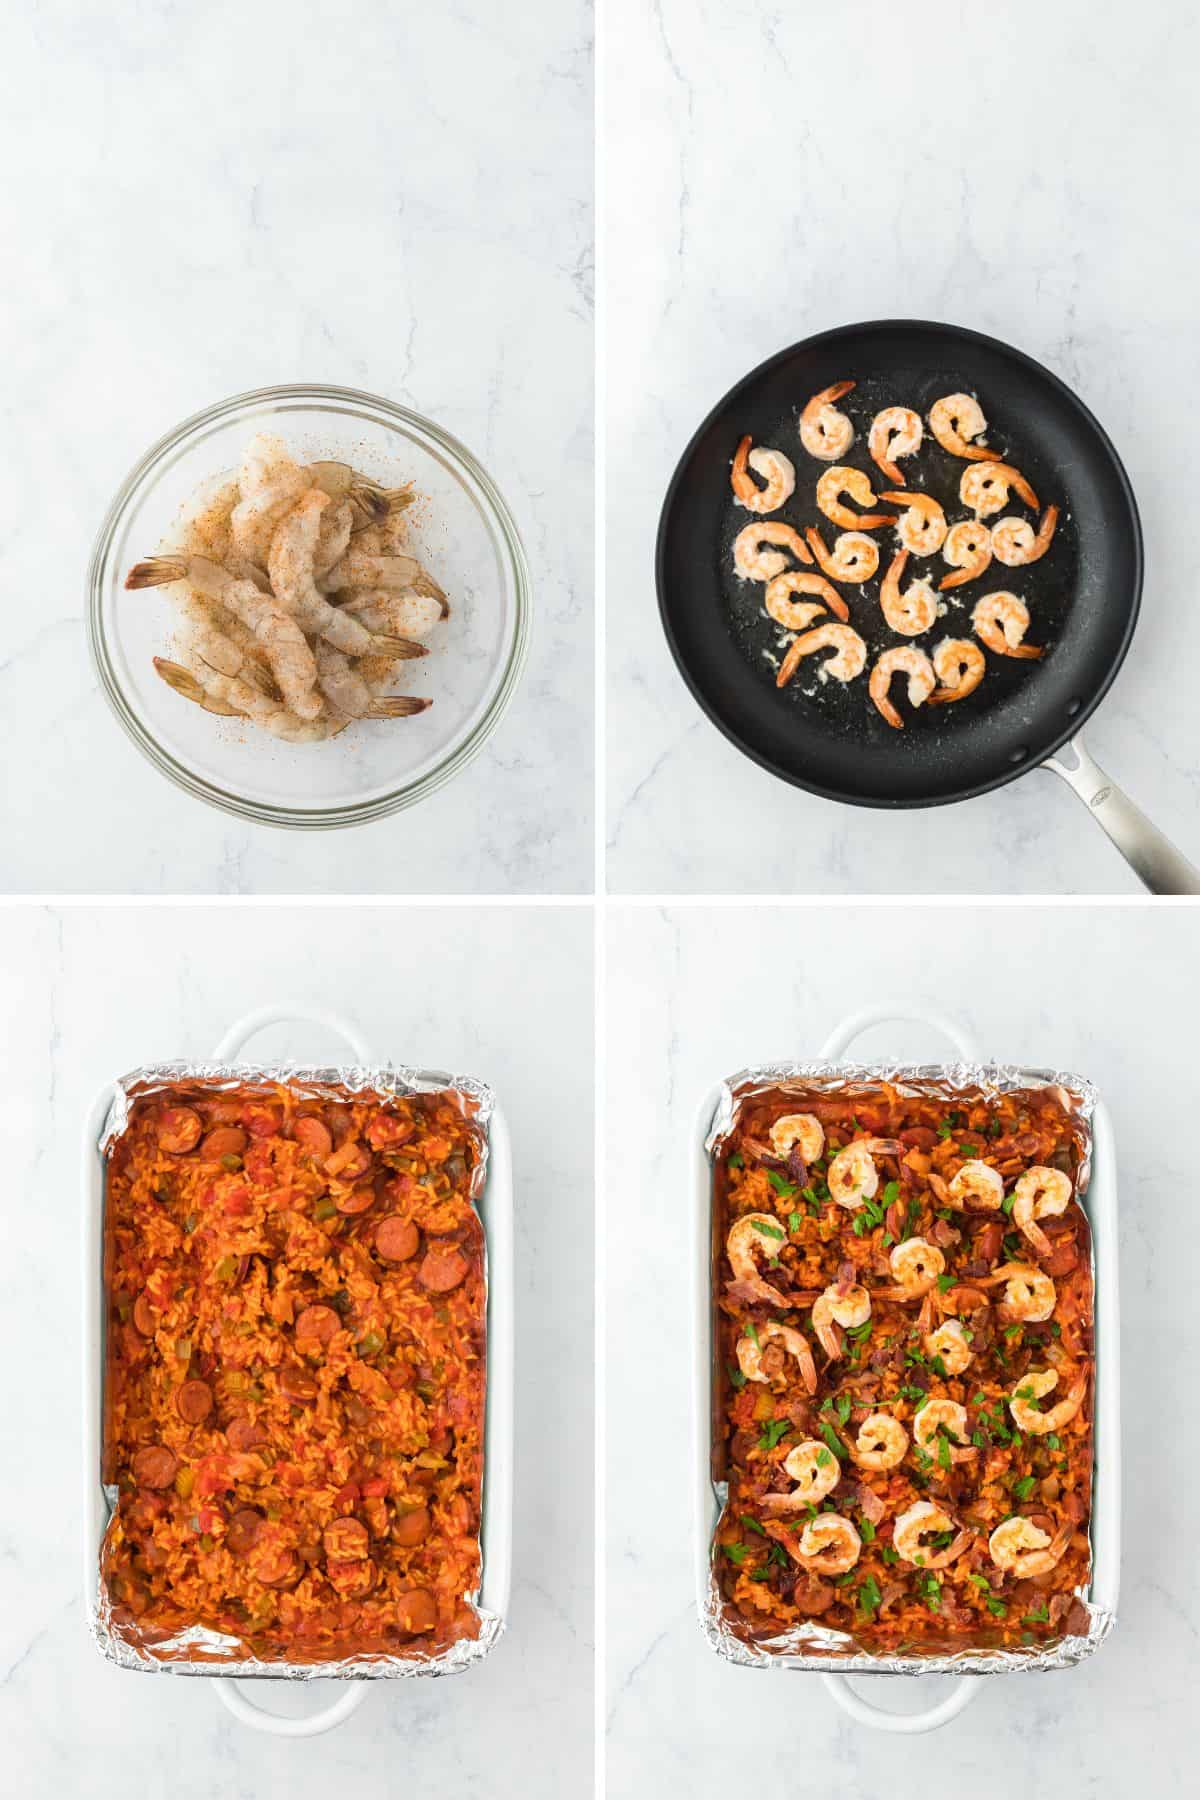 a collage of savannah red rice being baked then topped with sauteed shrimp before adding to the top of the red rice